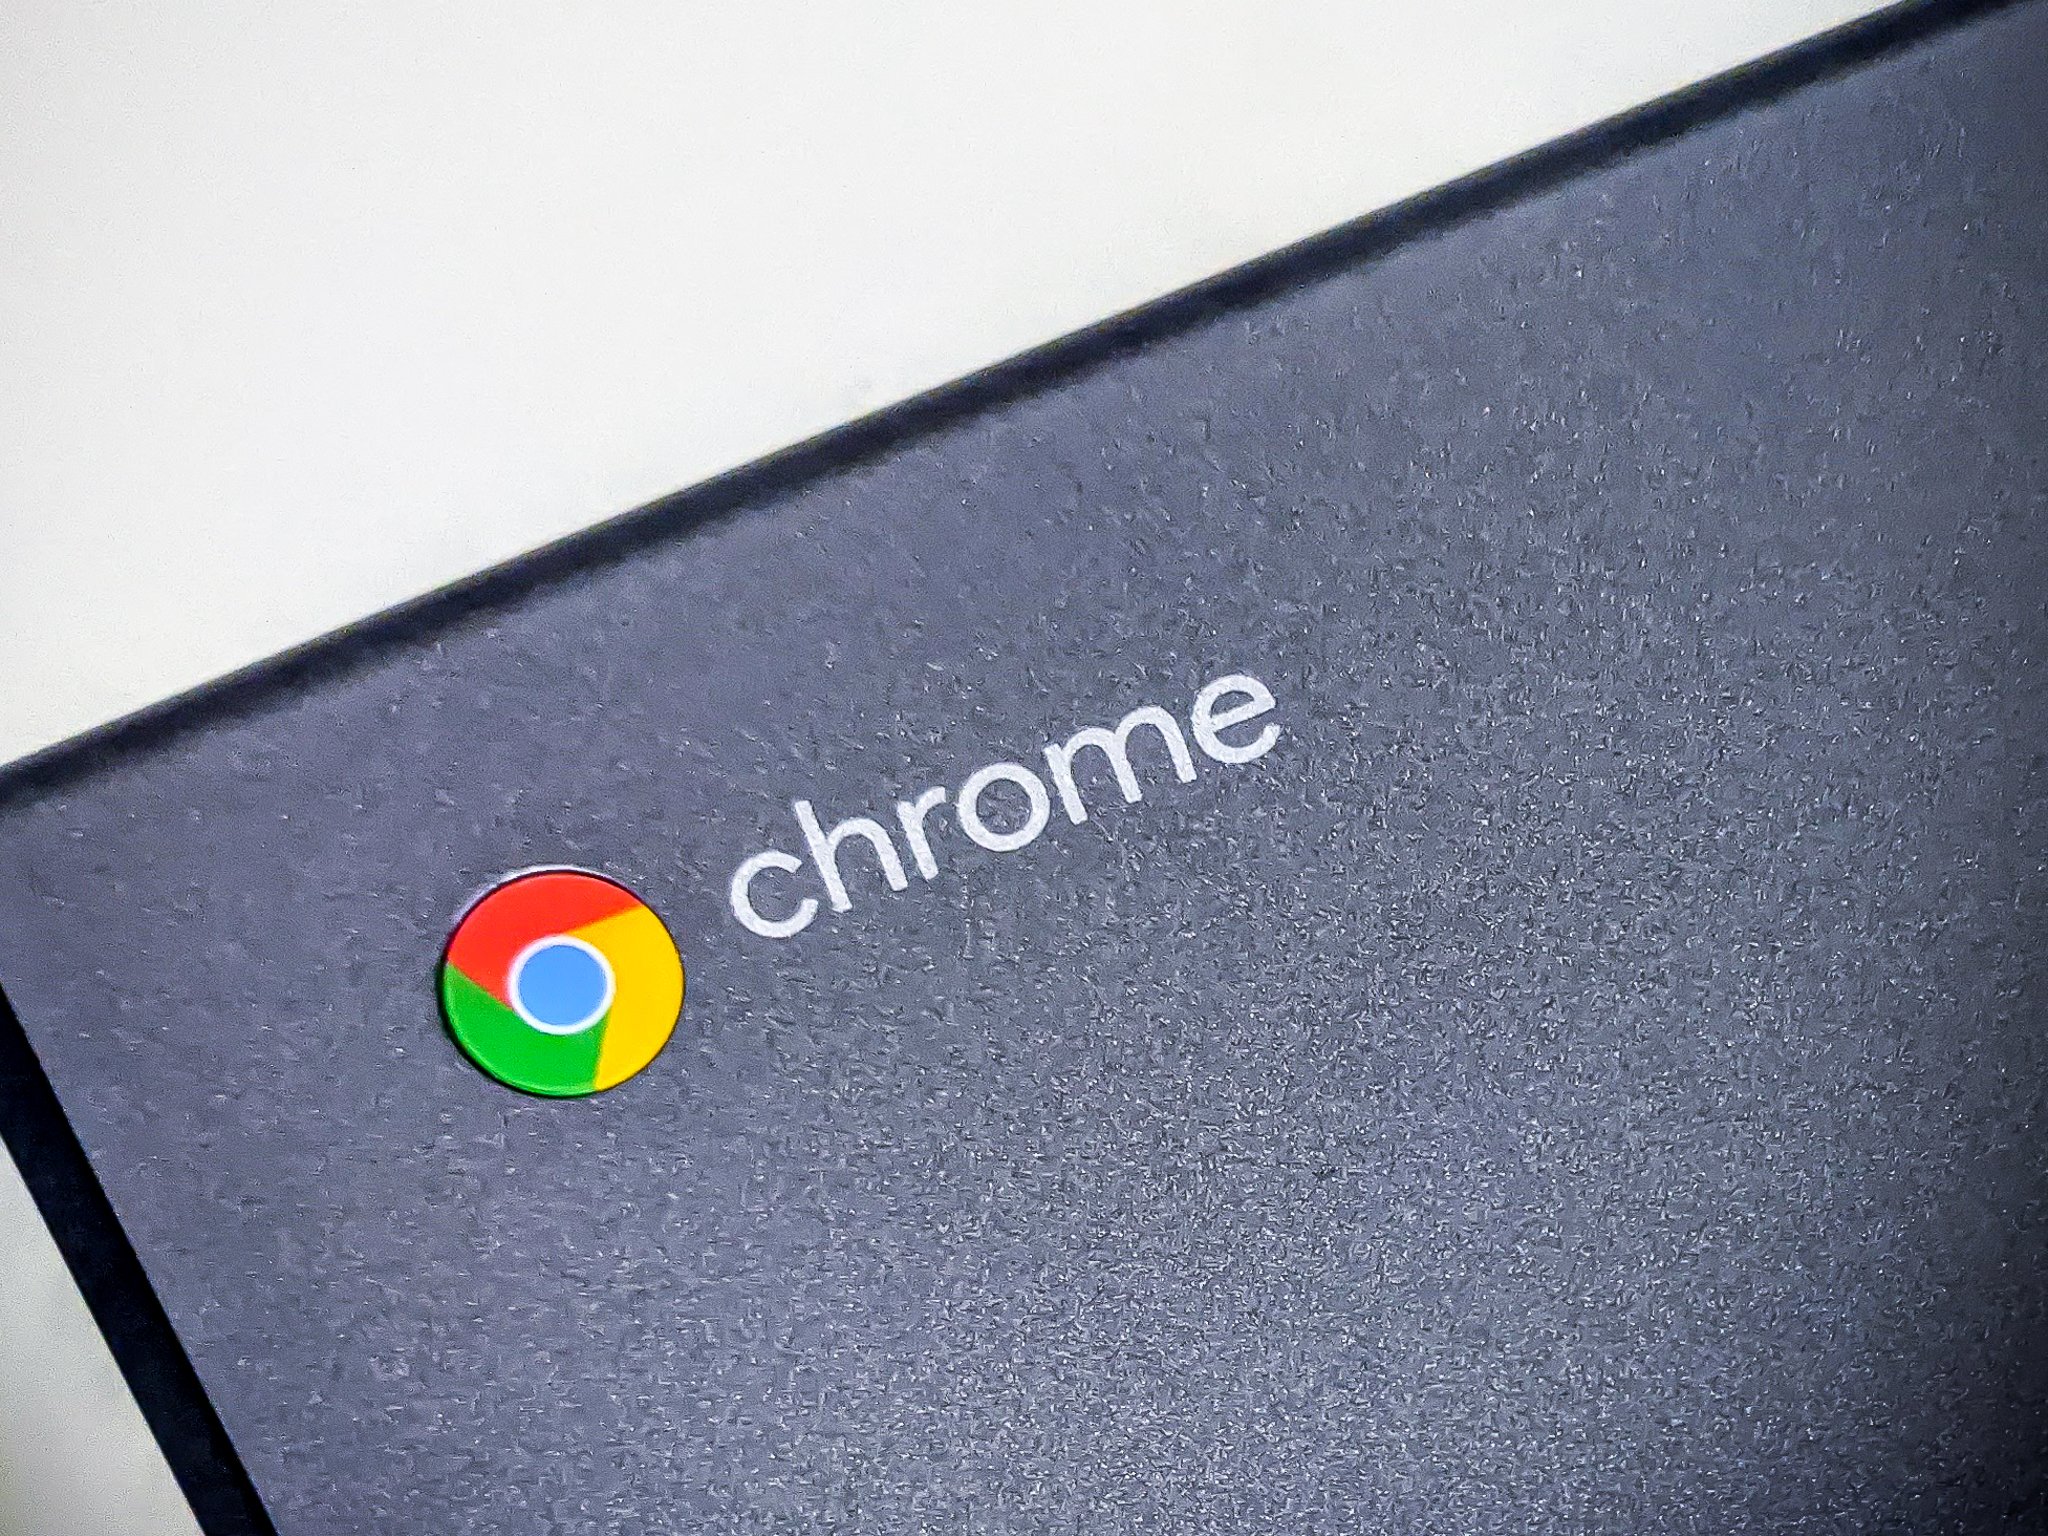 At under $100 this ASUS Chromebook Black Friday deal is a steal